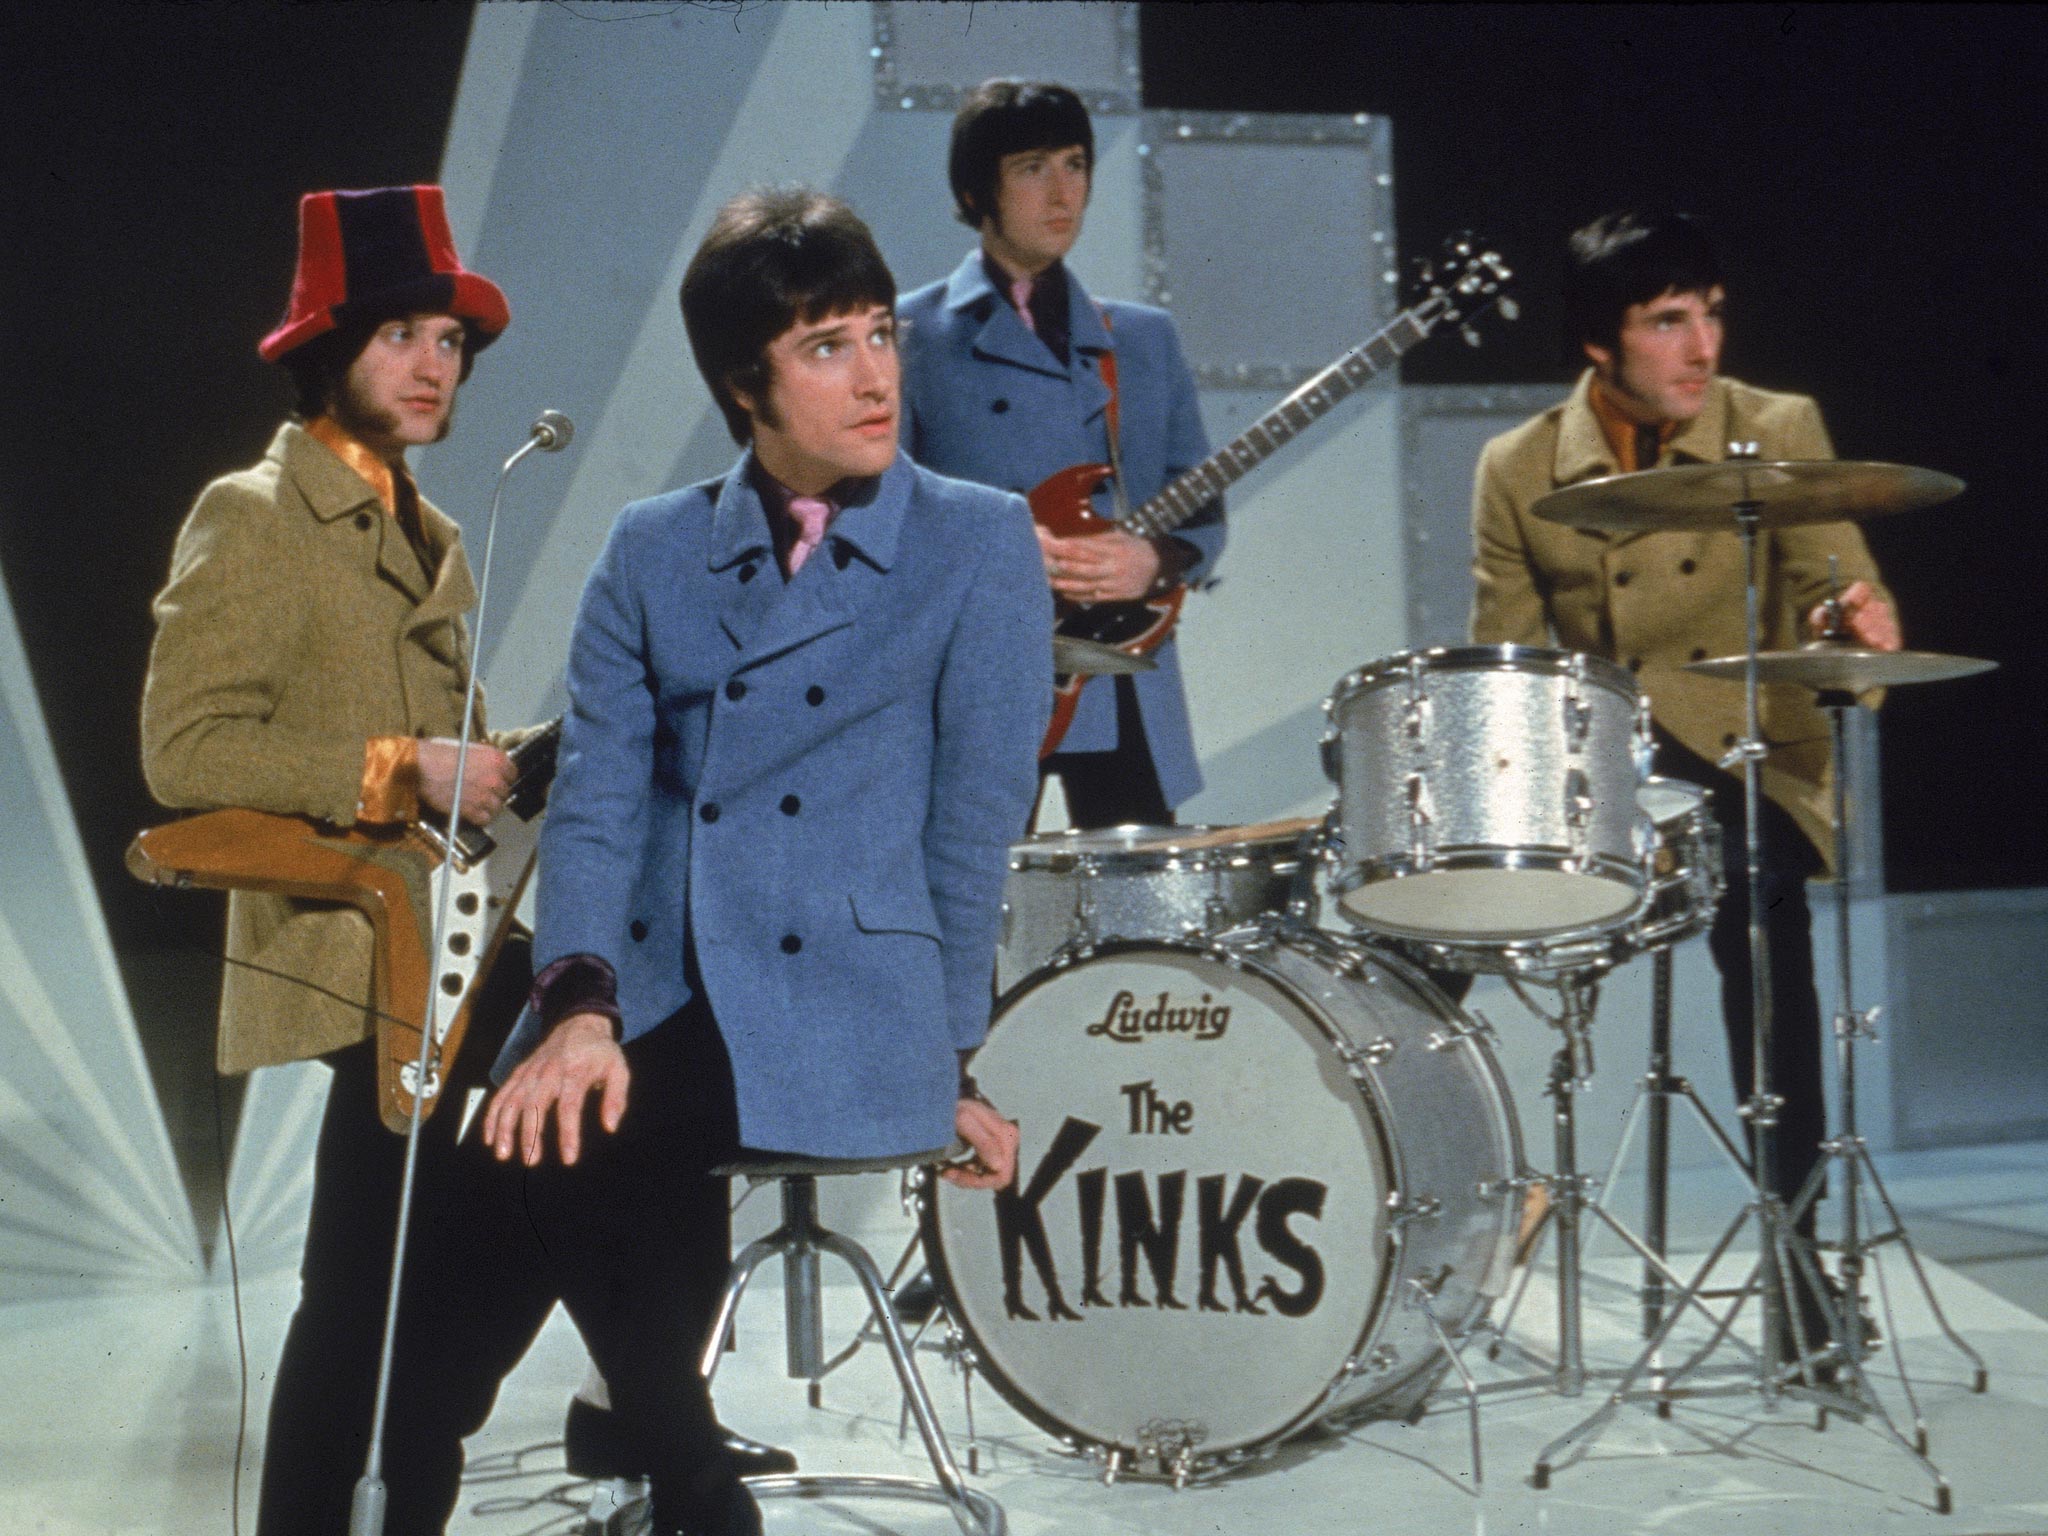 From left to right: Ray Davies, Peter Quaife, and Mick Avory, wait on the set of a television show getting ready to perform in 1968